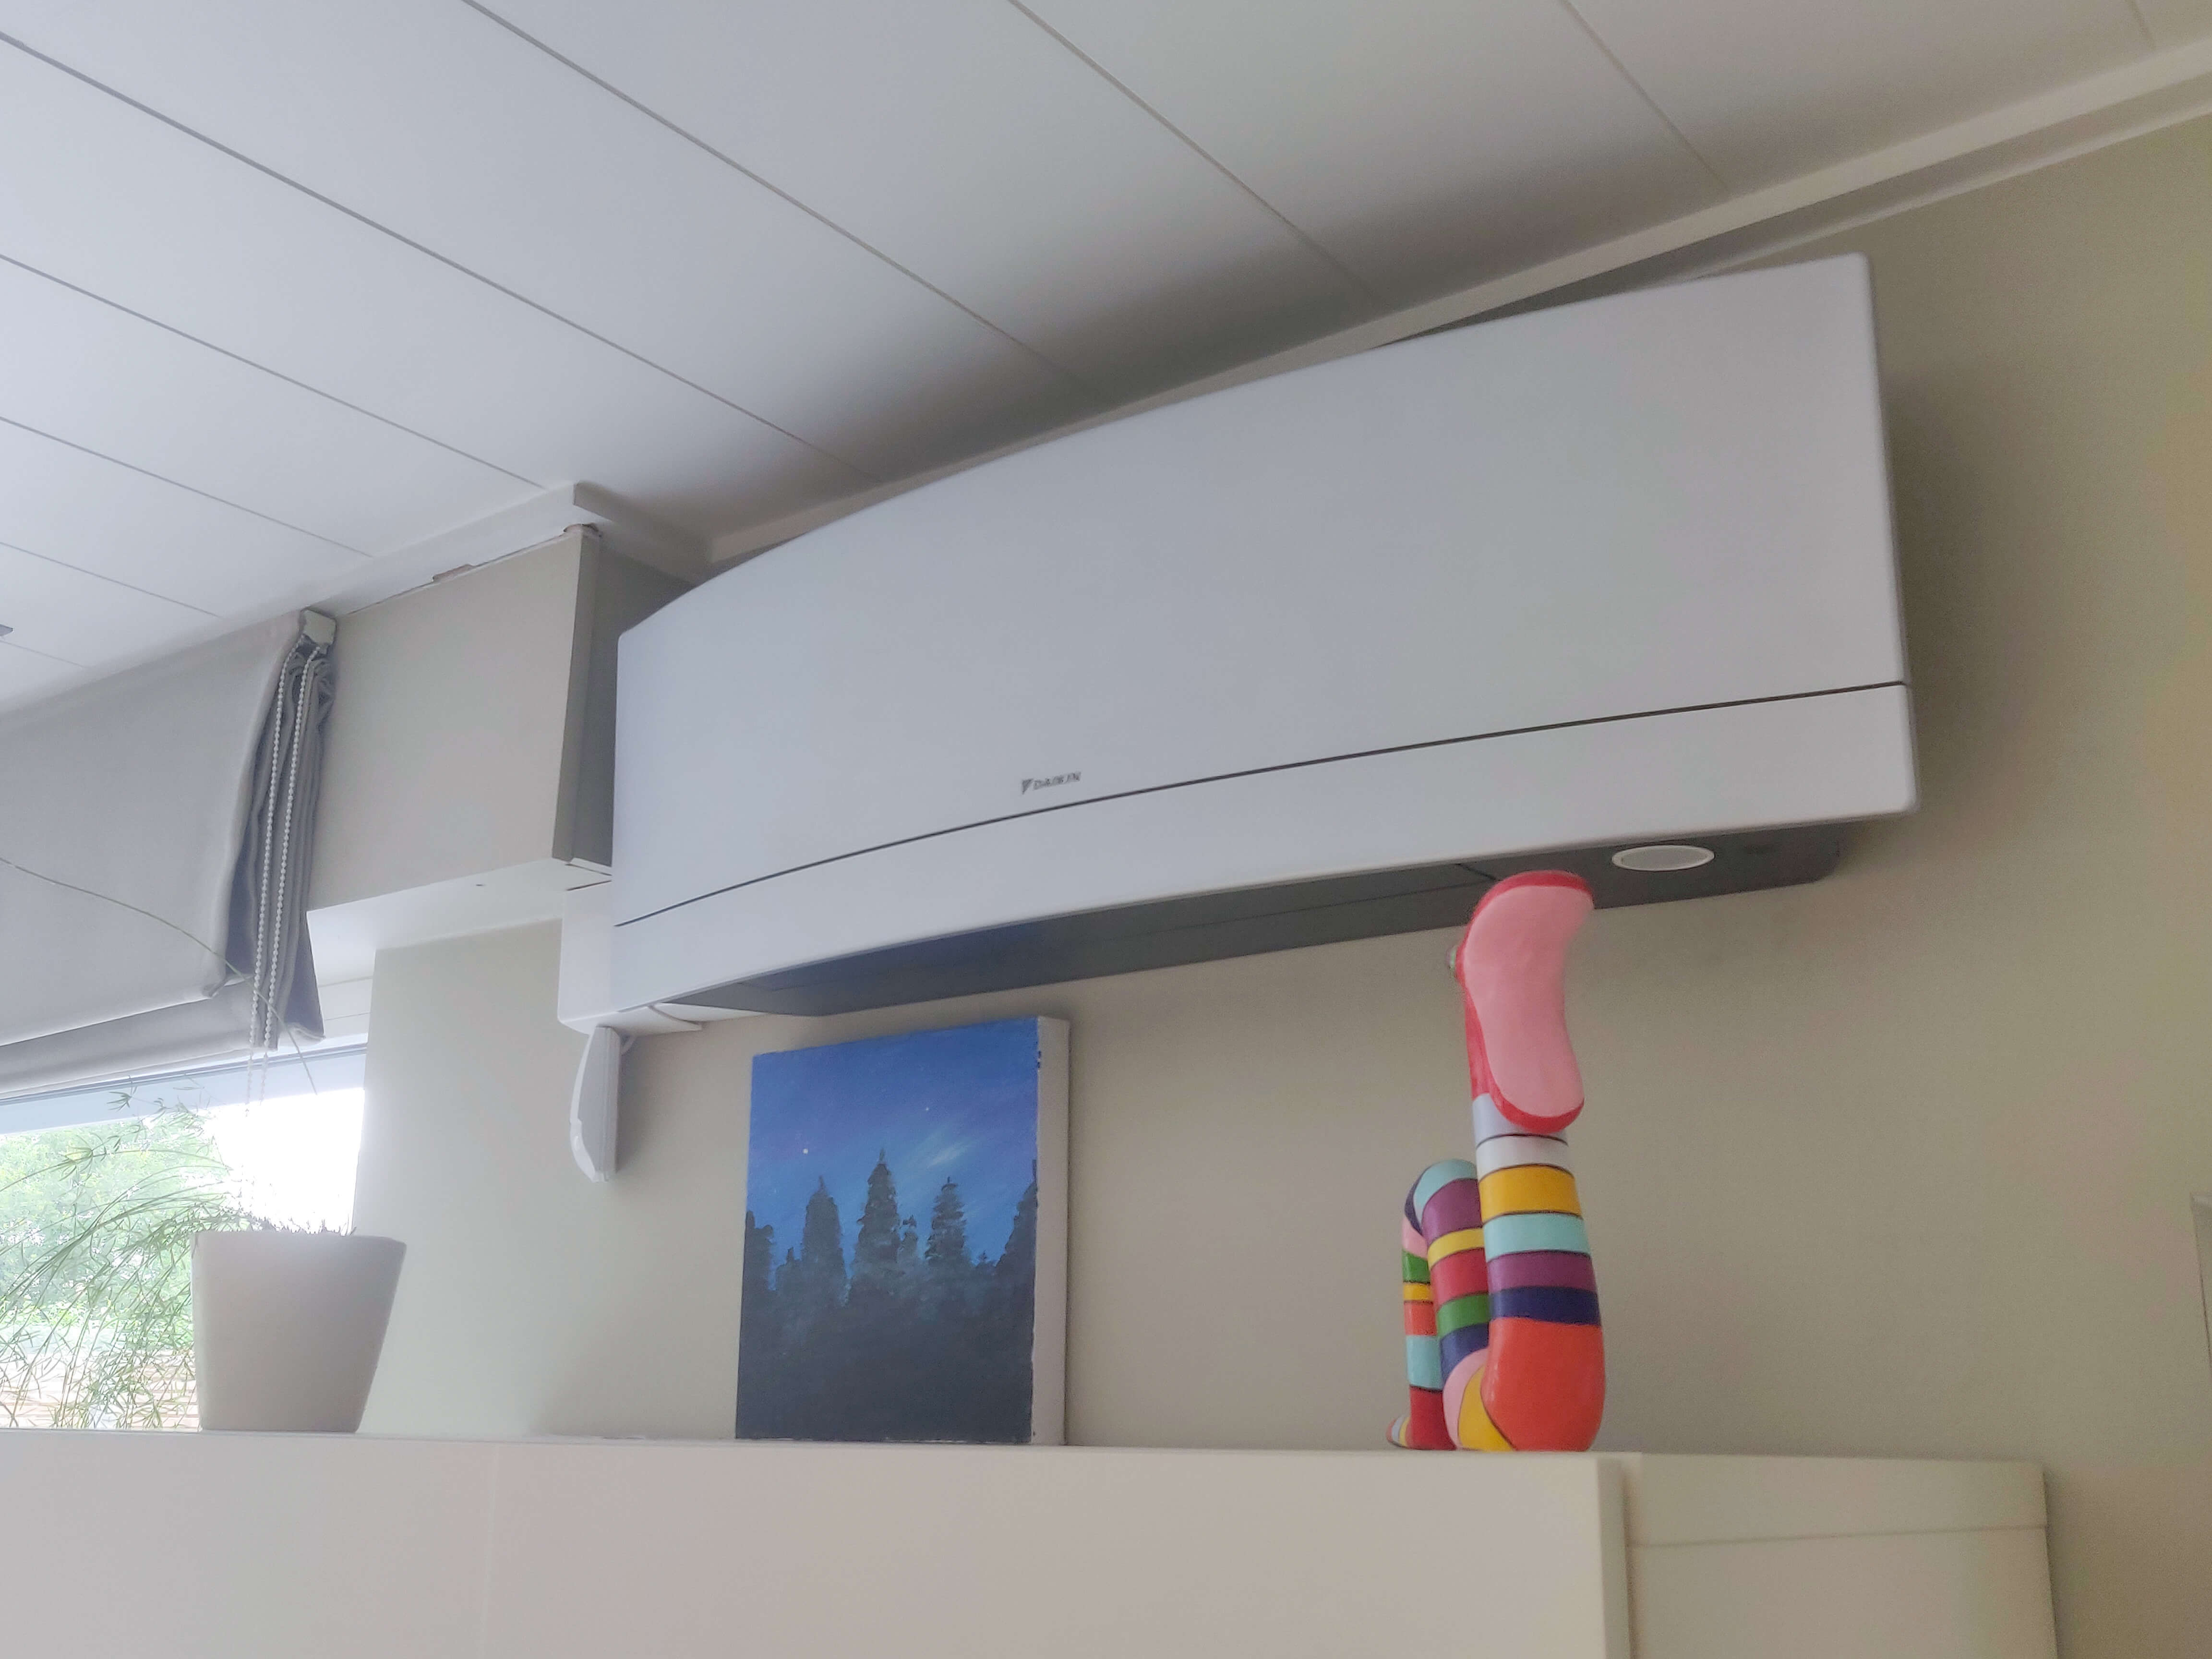 Stylish airco in particuliere woning.